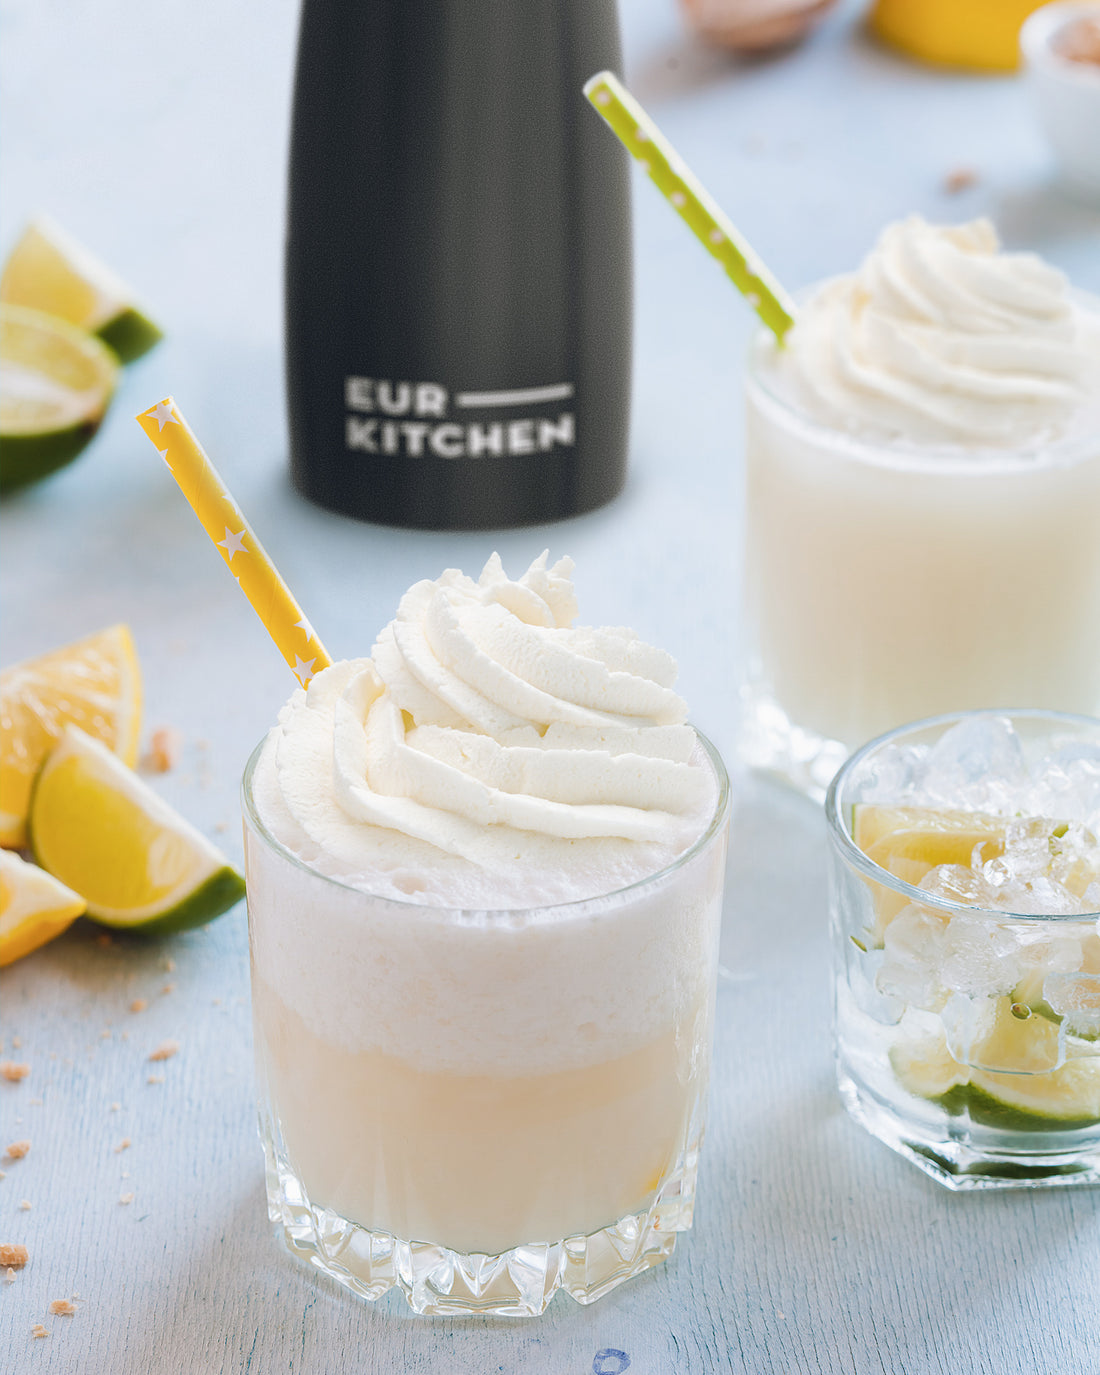 EurKitchen Whipped Cream Dispenser next to a refreshing lime drink 